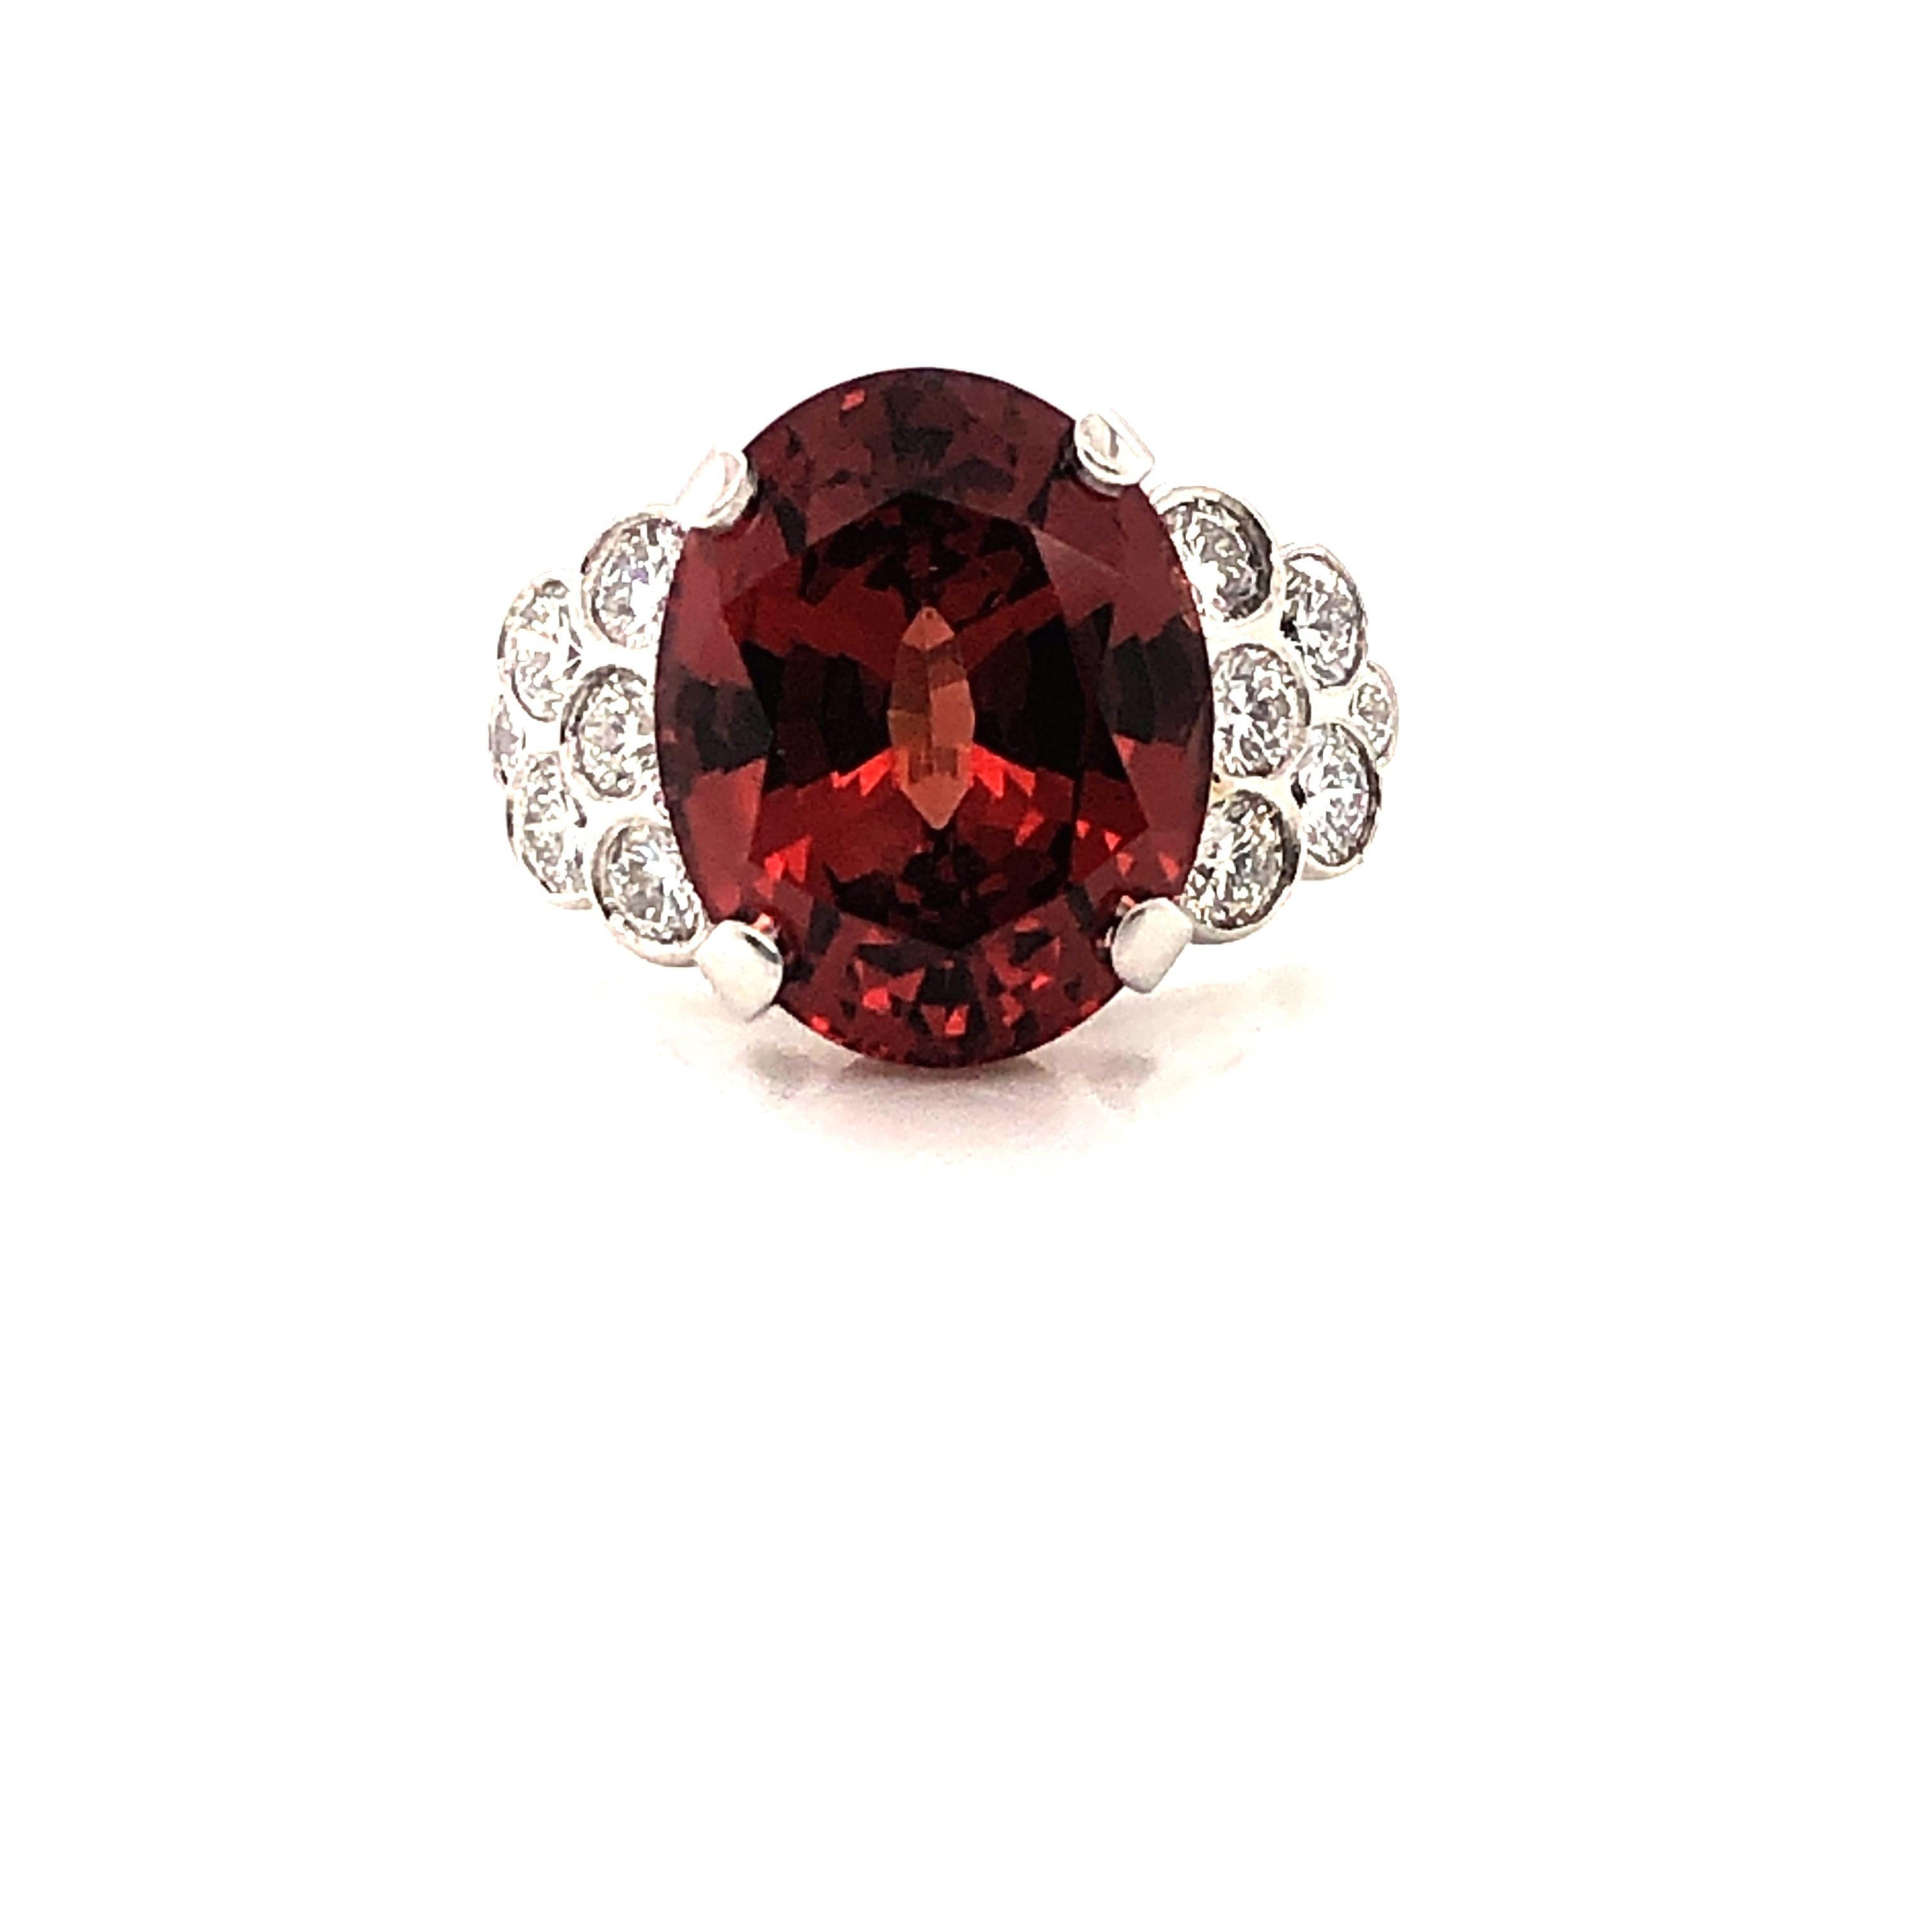 Oscar Heyman platinum ring contains a 10.08ct Malaya Garnet measuring 14.50mm x 11.60mm with a gorgeous deep brownish orange hue and 12 round diamonds (1.12cts, F-G/VS). It is stamped with the makers mark, IRID PLAT, and serial number 302200.

Size